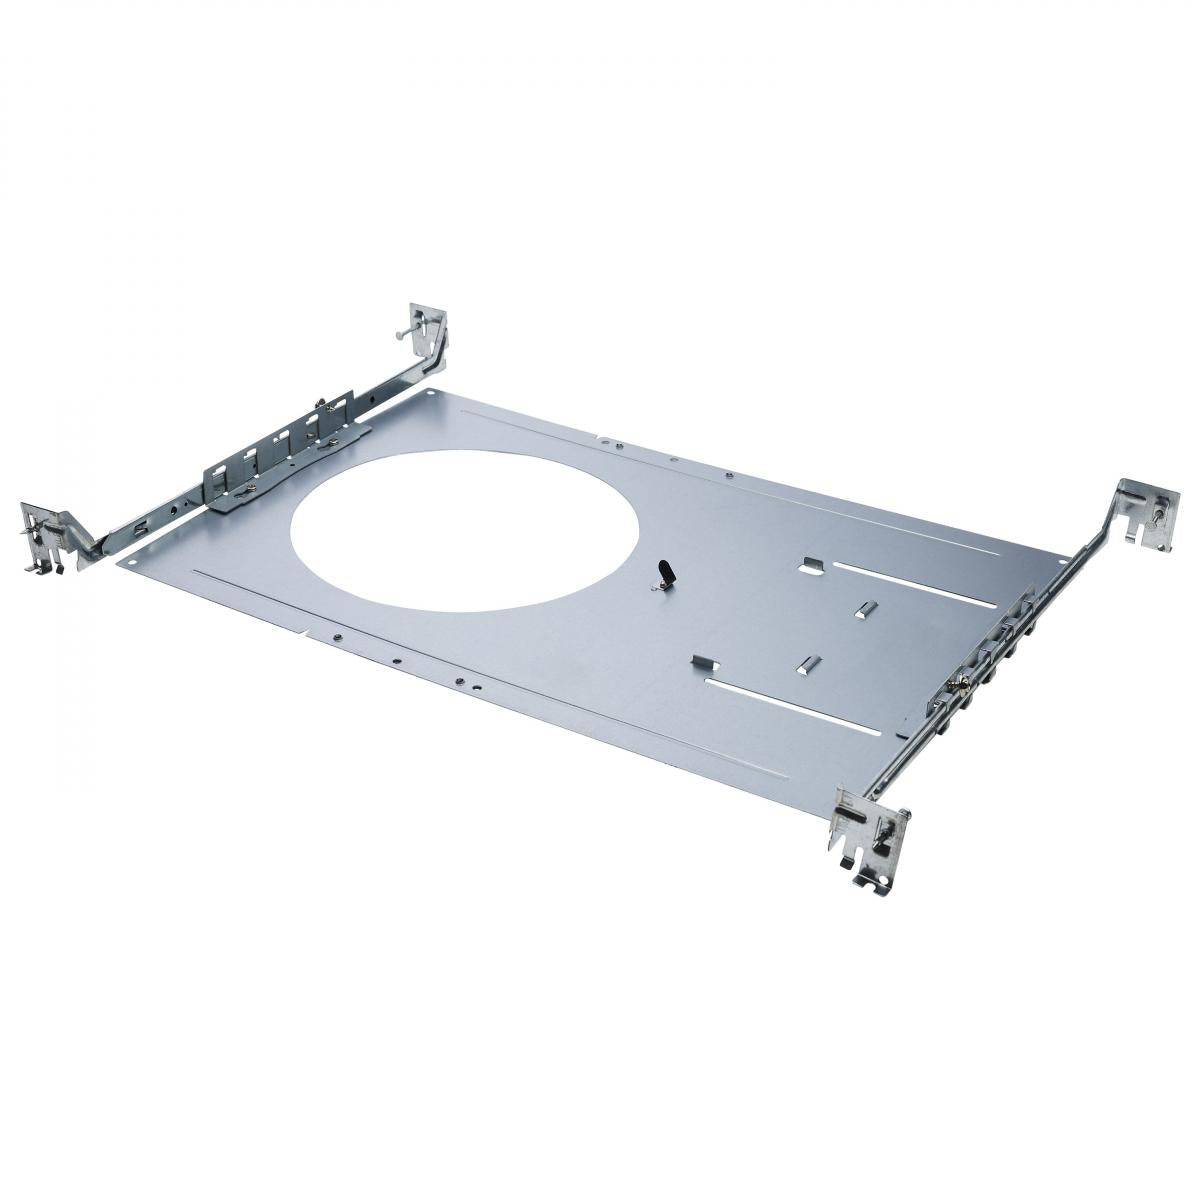 8 inch New Construction Round Mounting Plate with Hanger Bars